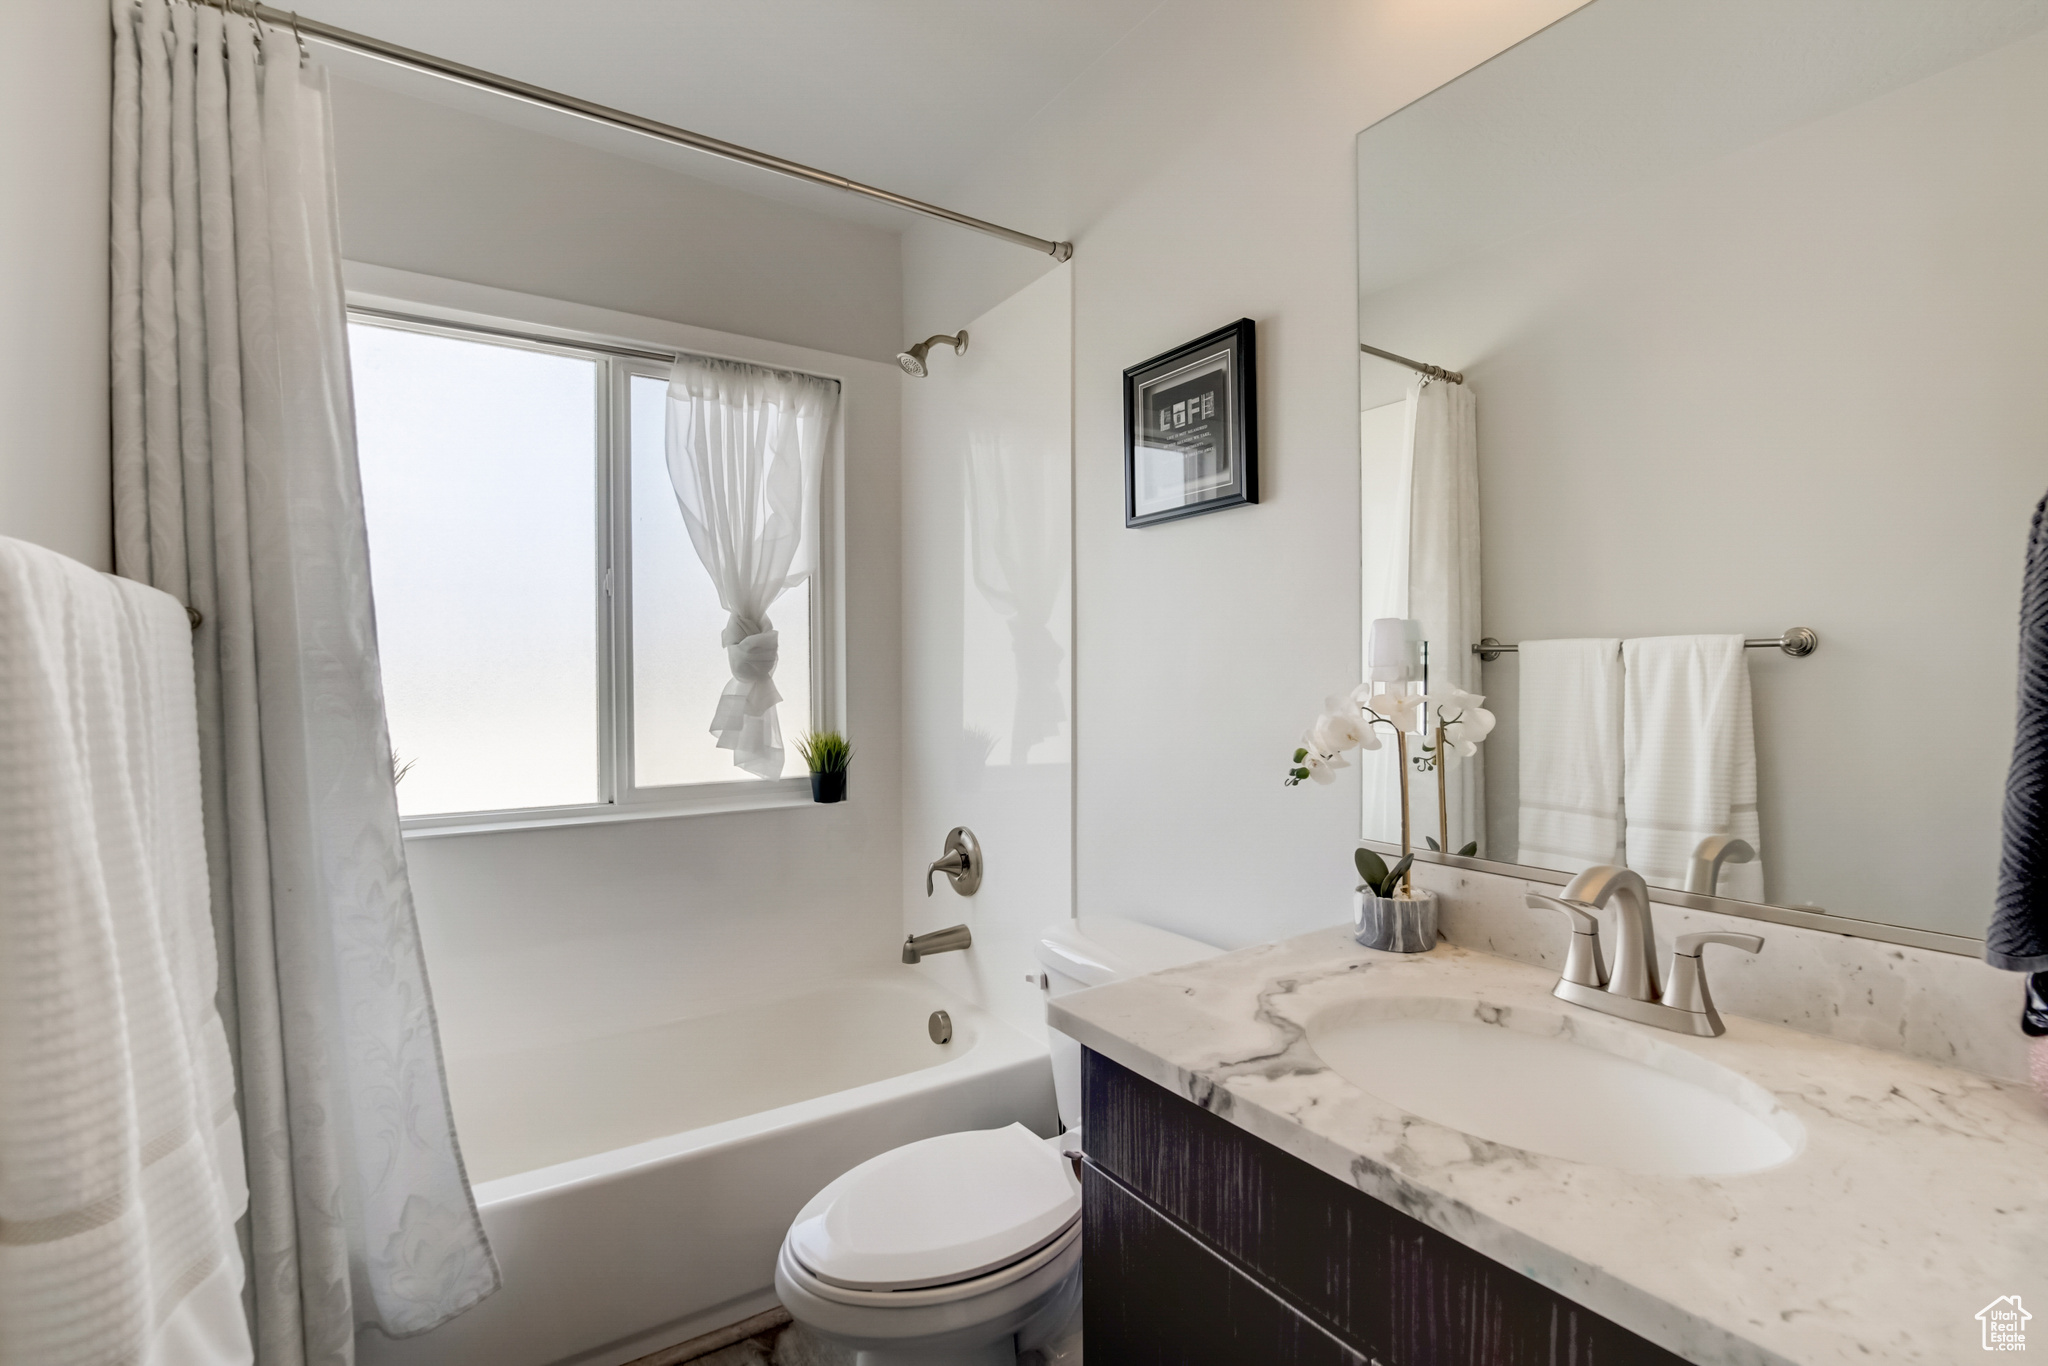 Full bathroom featuring shower / tub combo with curtain, toilet, vanity, and plenty of natural light